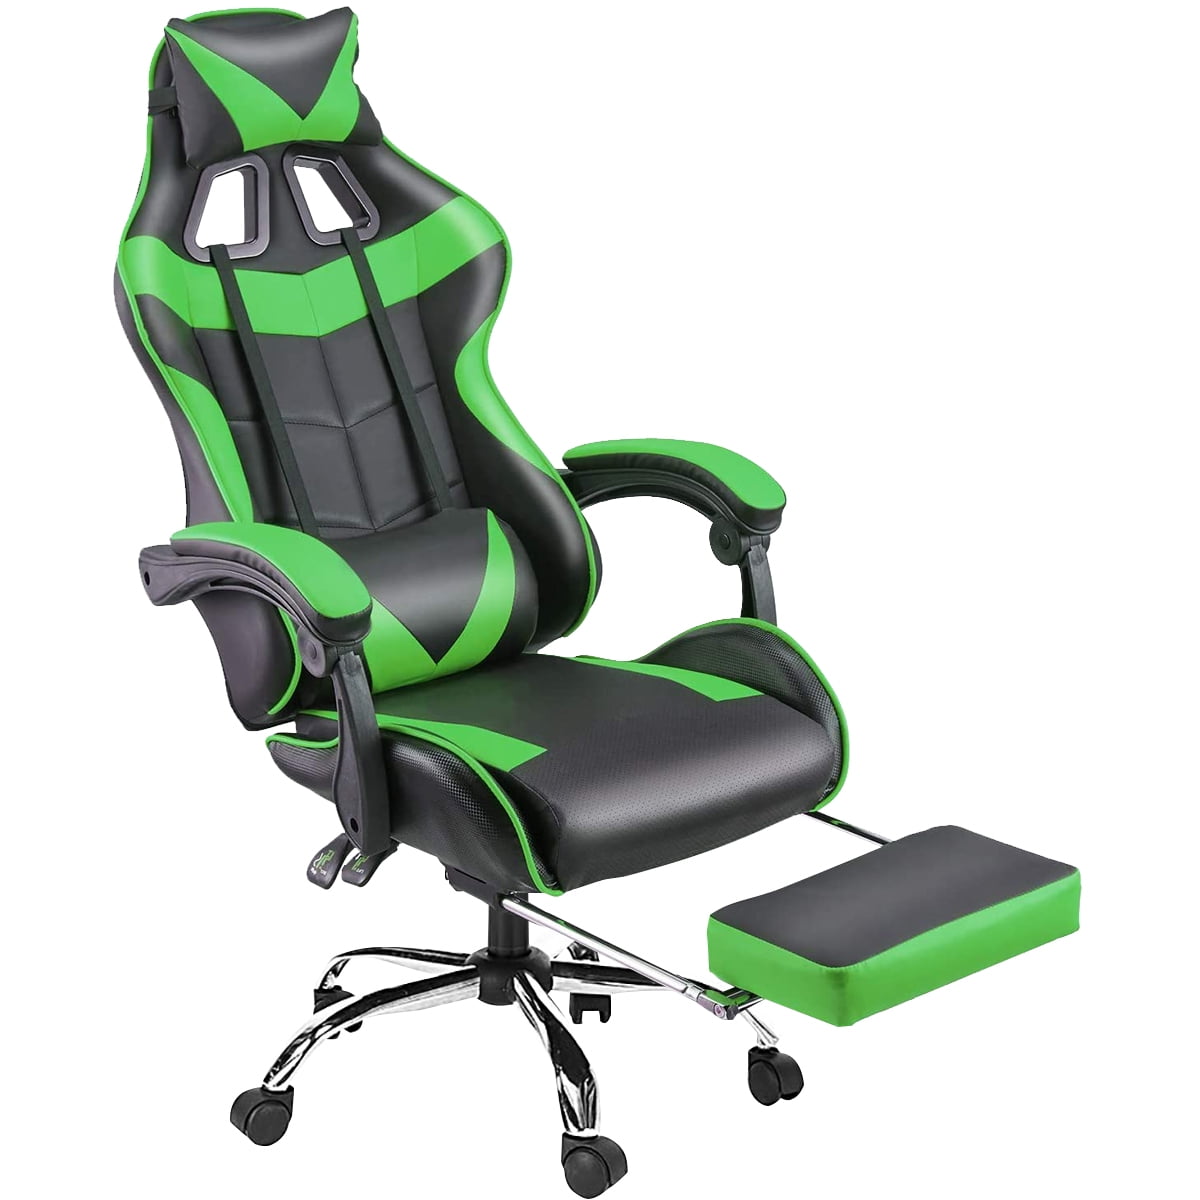 Details about   Executive Office Chair Racer Gaming Chair Computer Desk Seat Mesh Recliner Chair 